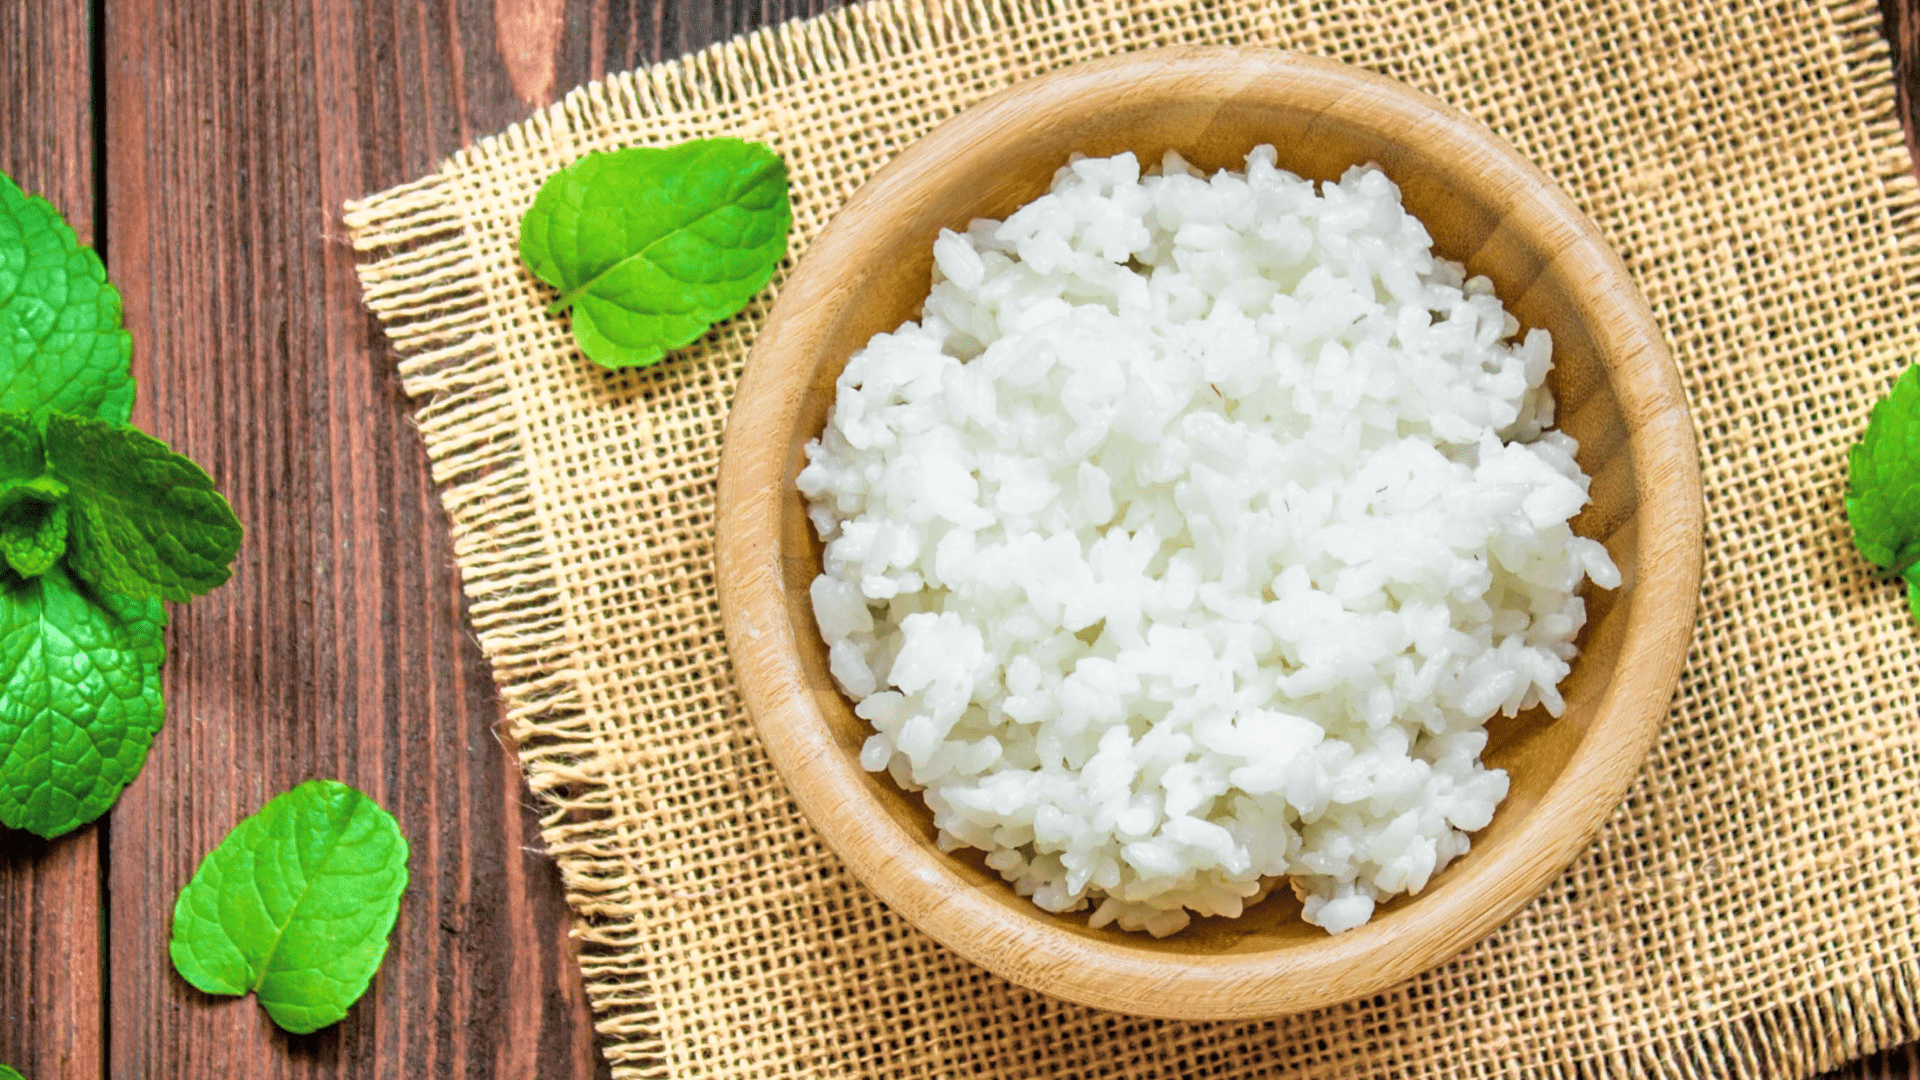 Best rice cooker for sticky rice | Top 4 for evenly cooked glutinous rice